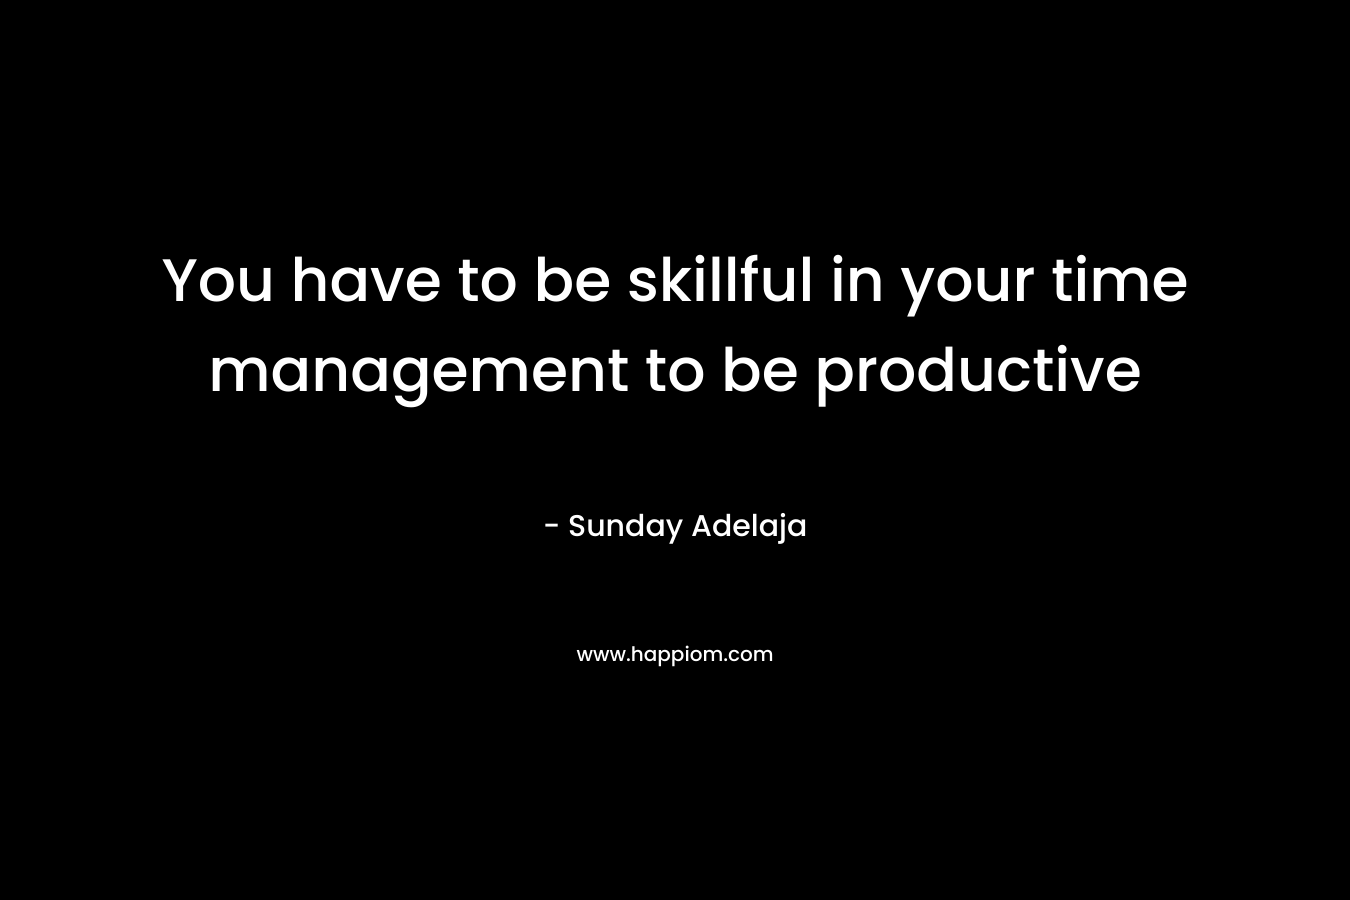 You have to be skillful in your time management to be productive